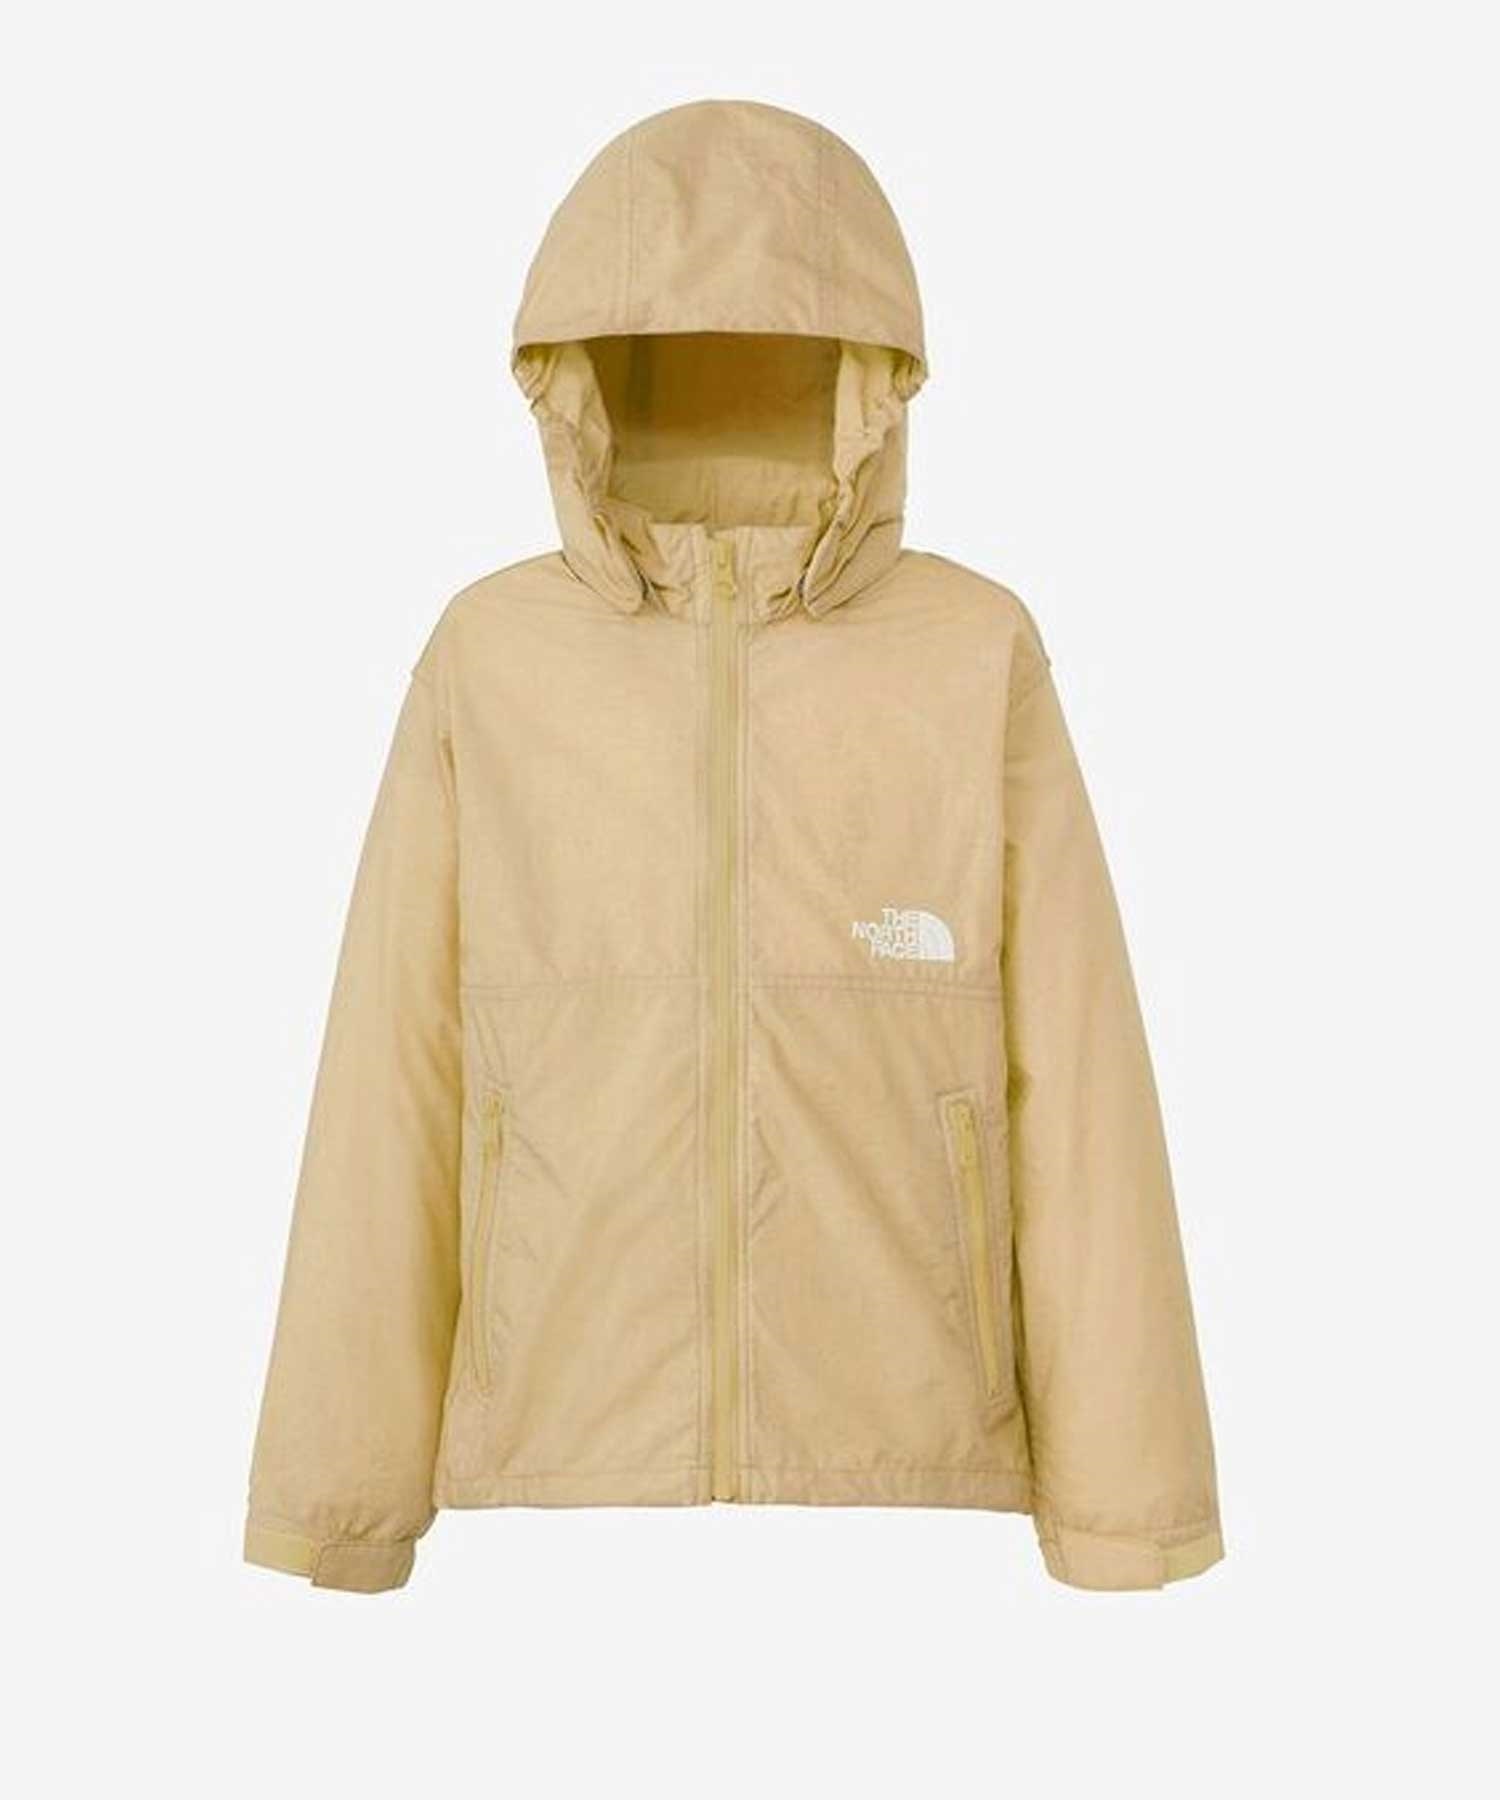 THE NORTH FACE ザ・ノース・フェイス COMPACT JACKET キッズ ジュニア